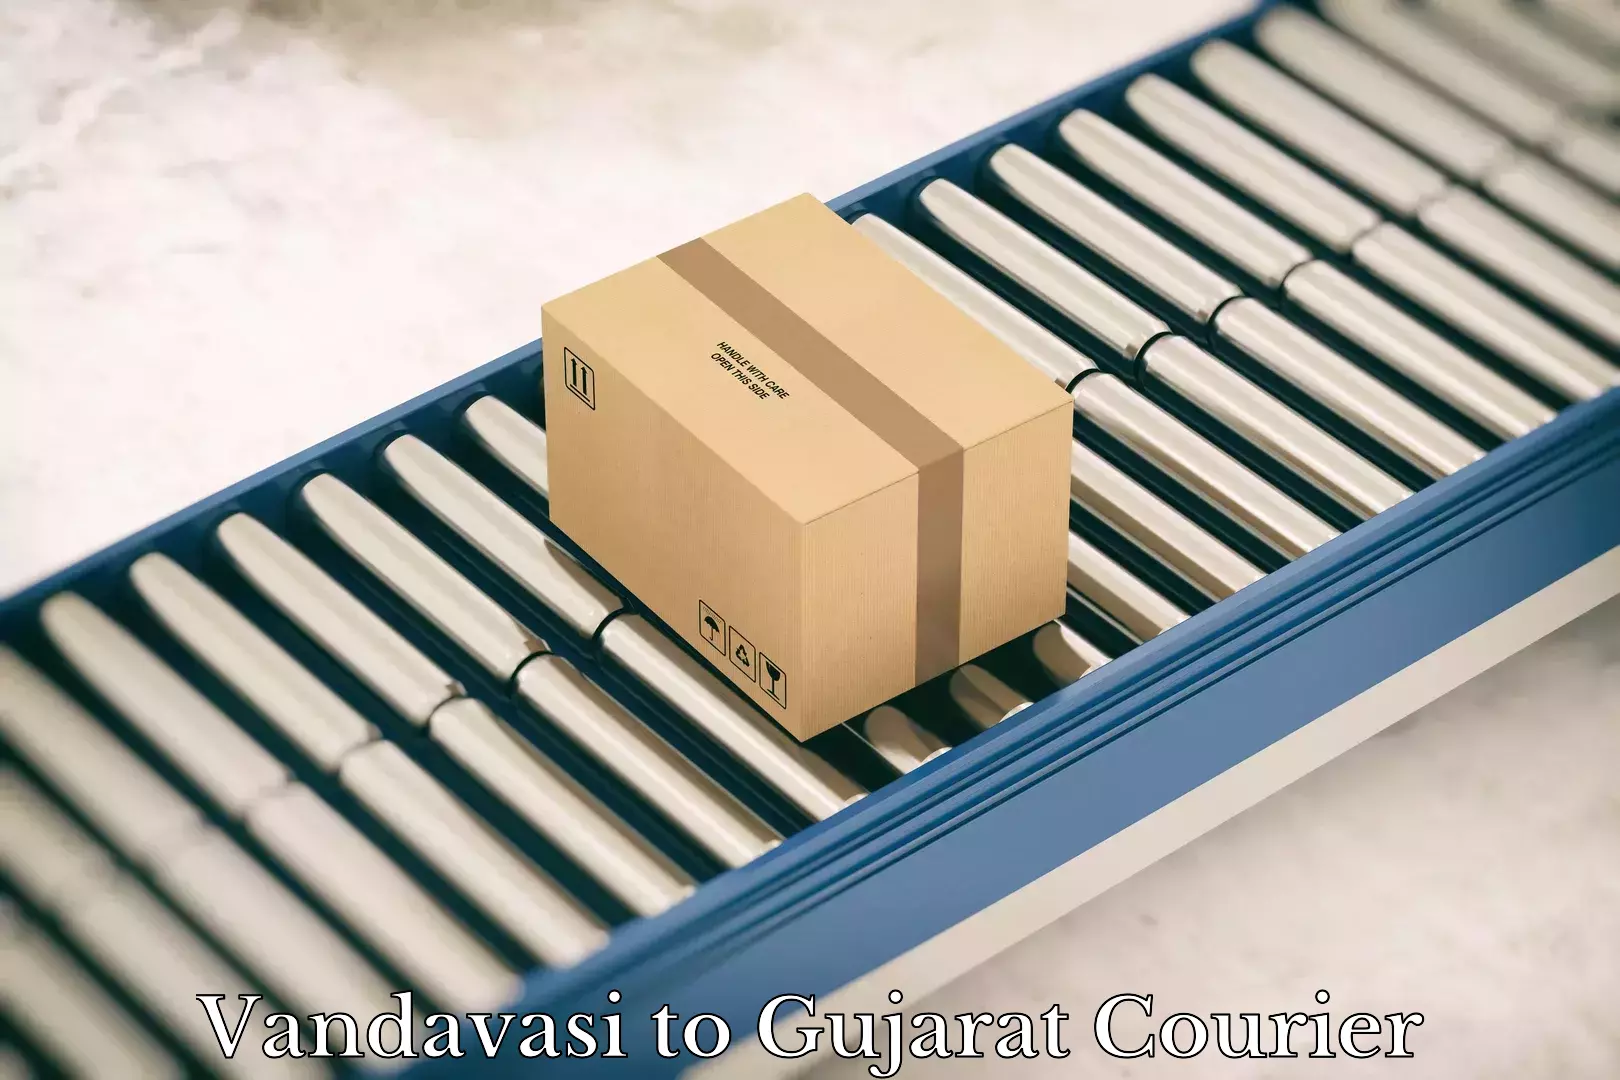 State-of-the-art courier technology Vandavasi to Gujarat